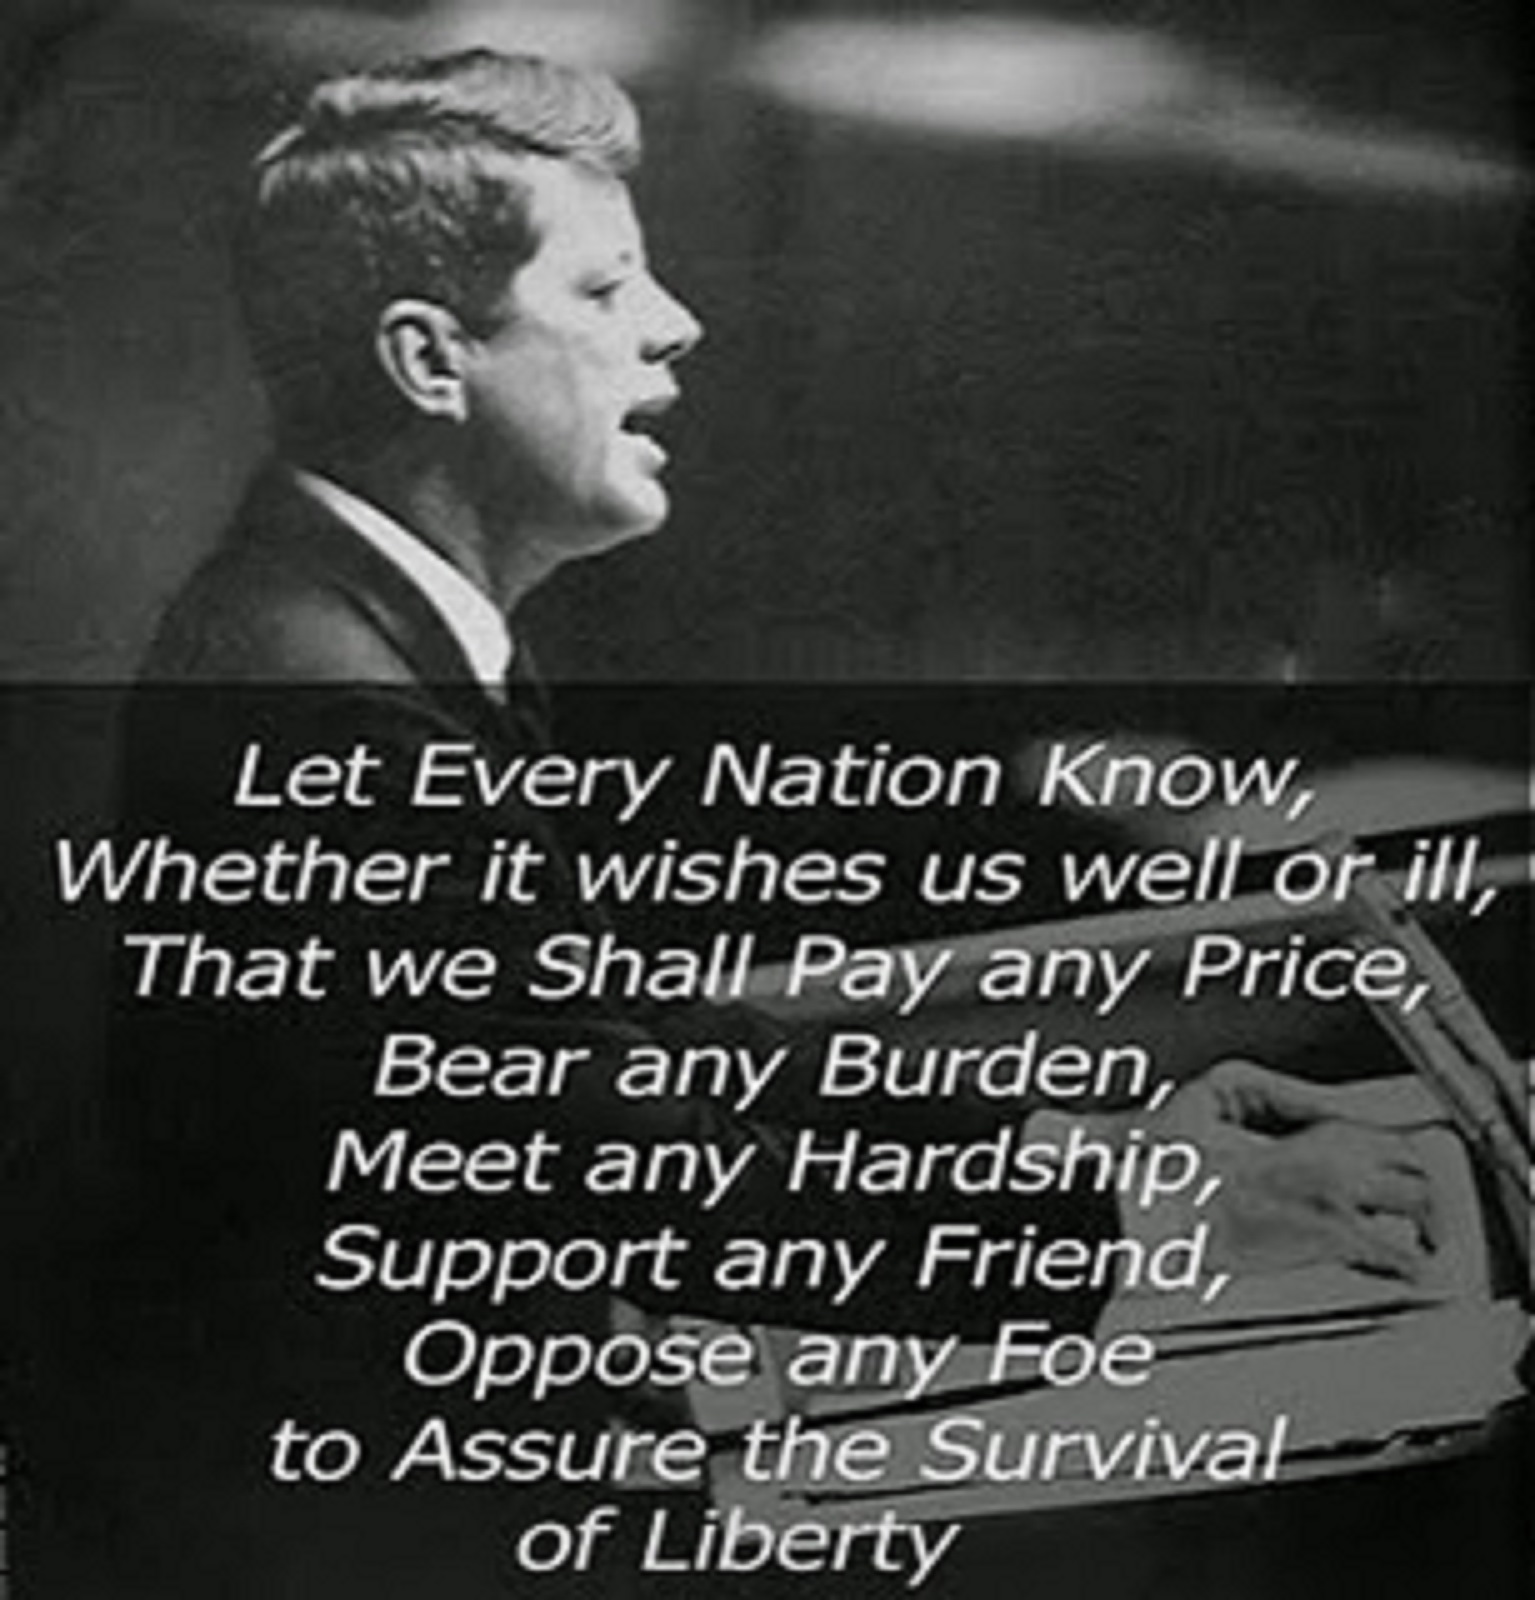 LET EVERY NATION KNOW - BY JFK